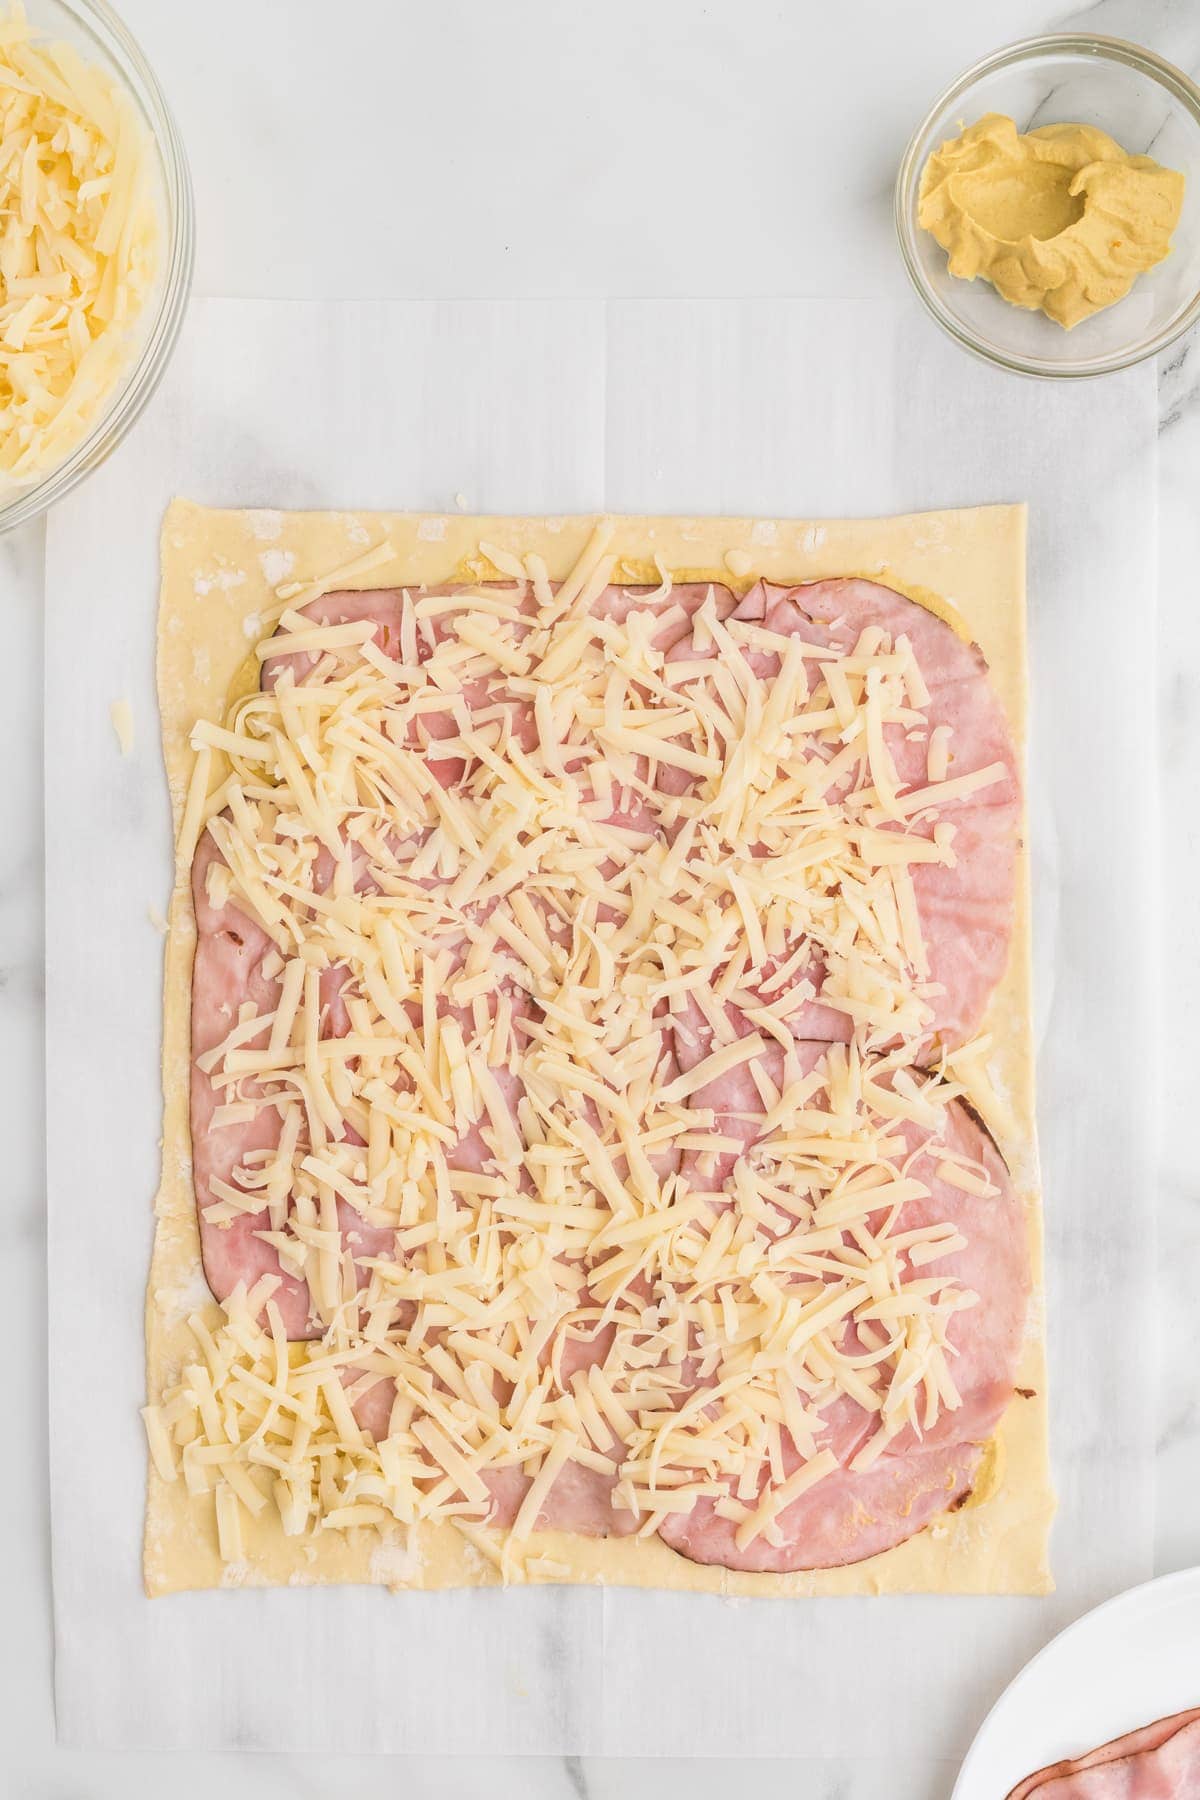 Grated cheese and slices of ham on a puff pastry